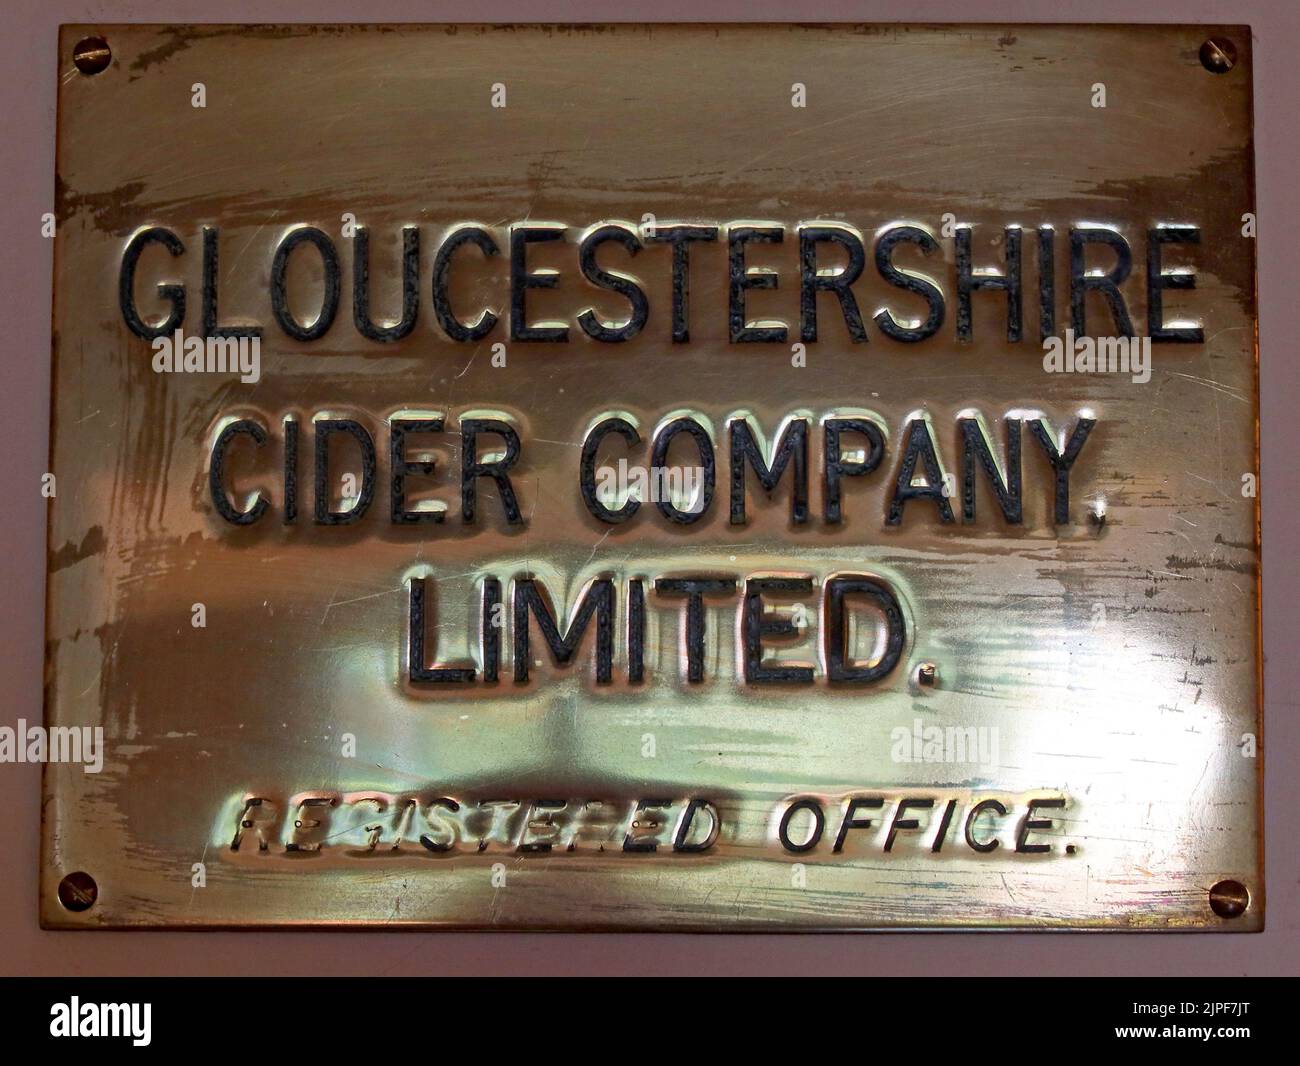 Brass plaques, Gloucestershire Cider Company Limited - registered office - HP Bulmer Stock Photo